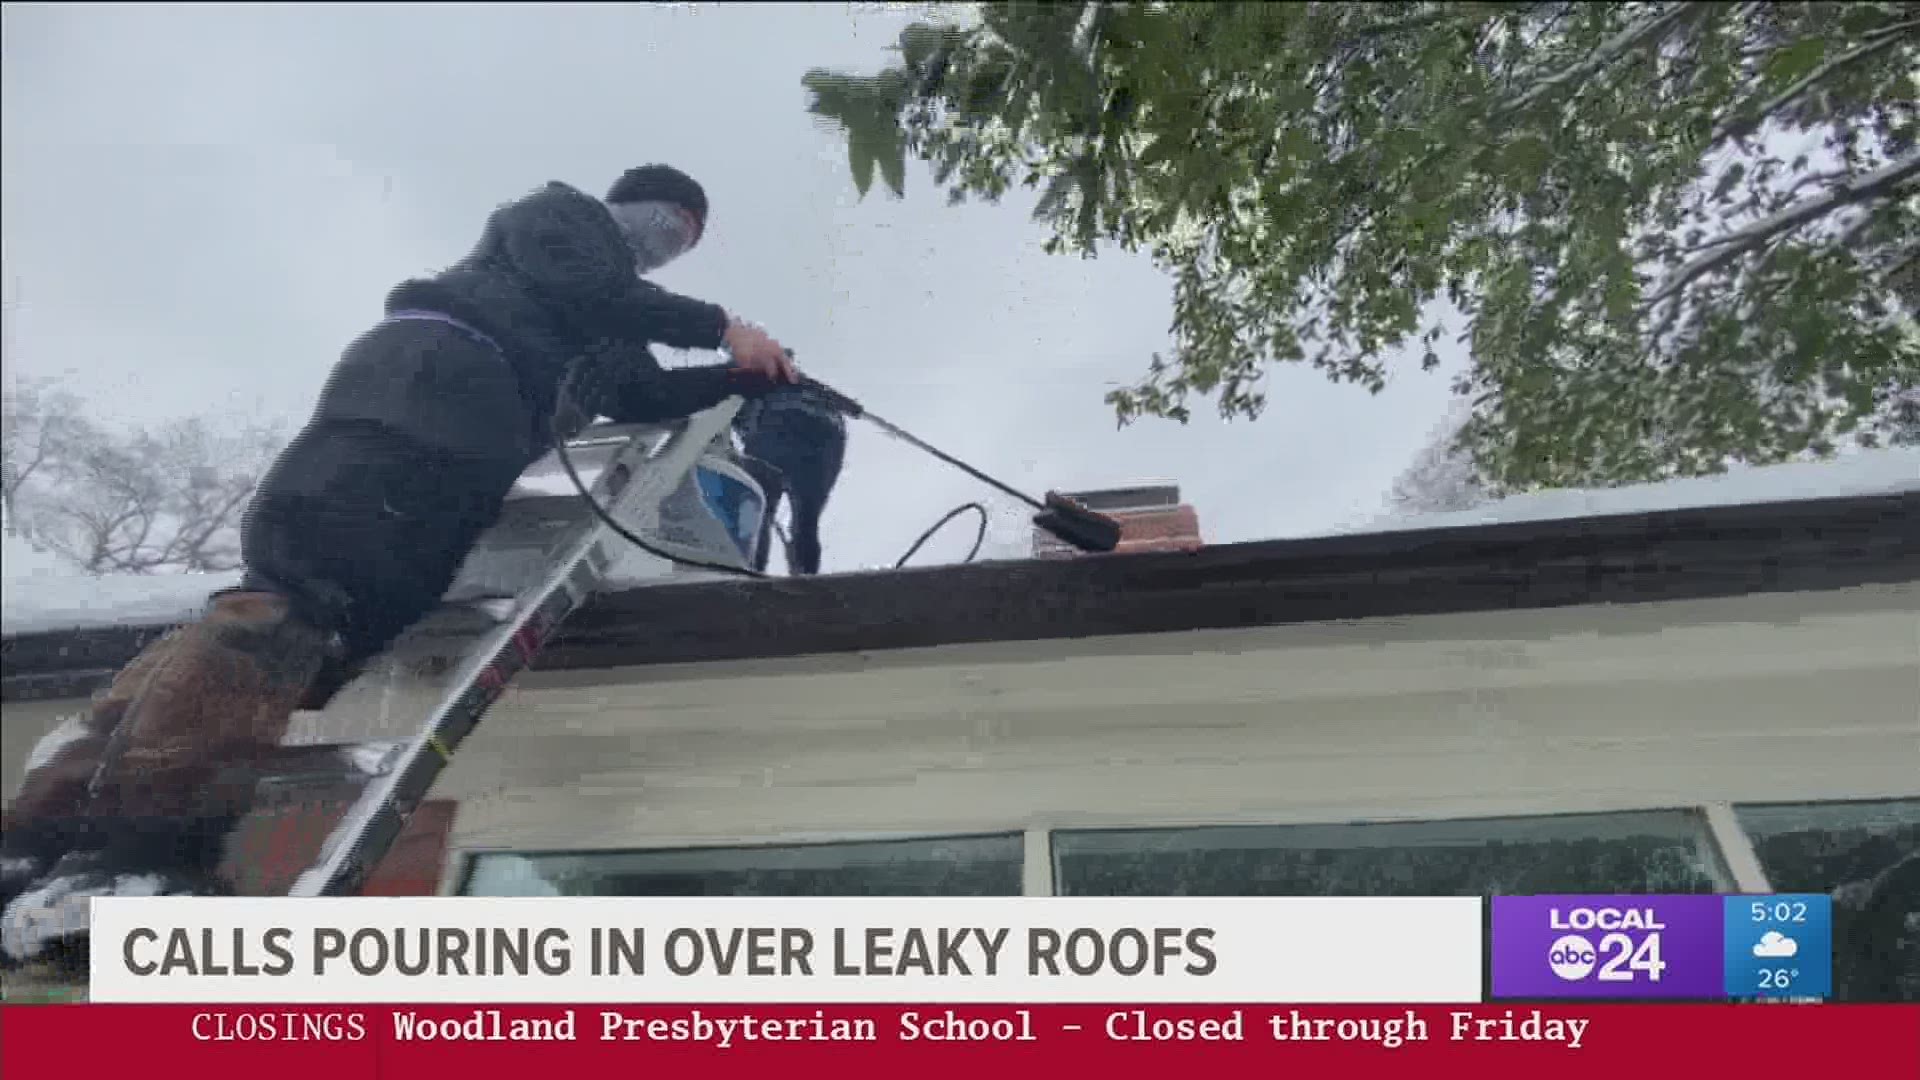 Roofing companies are expecting an "unprecedented" amount of leaky roof calls.